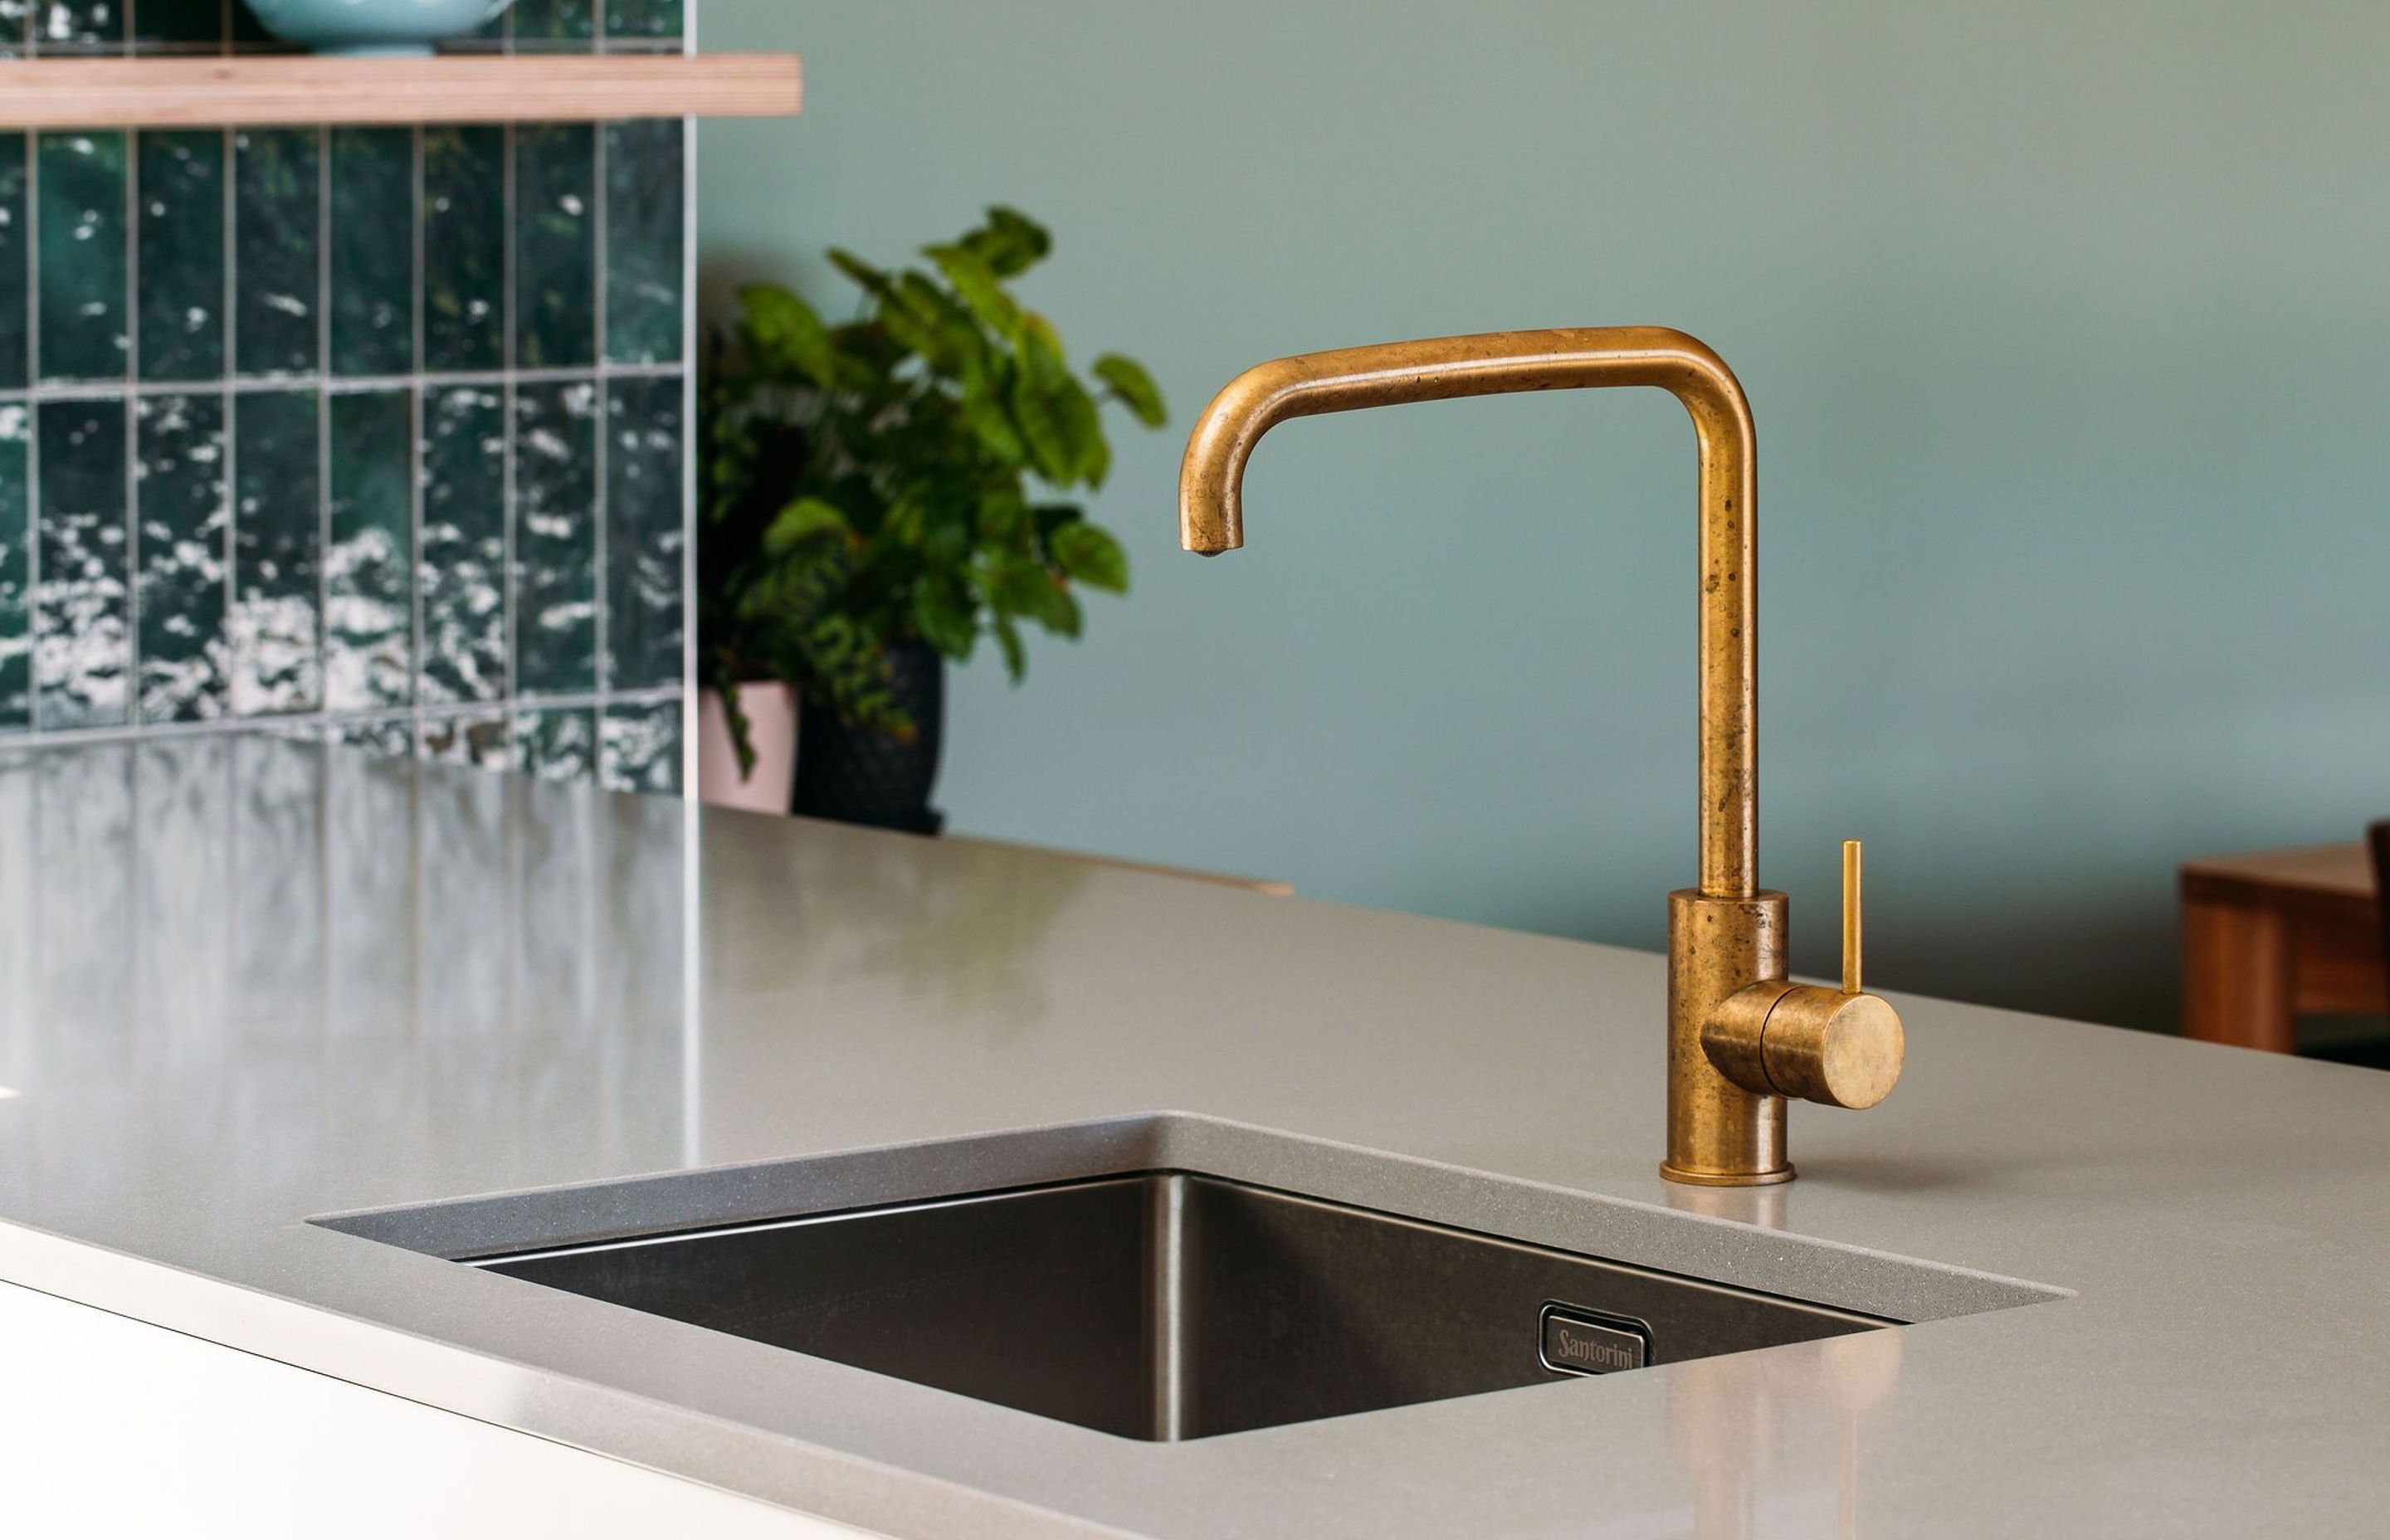 Gorgeous tarnished brass tapware and cabinetry handles - built for a lifetime.